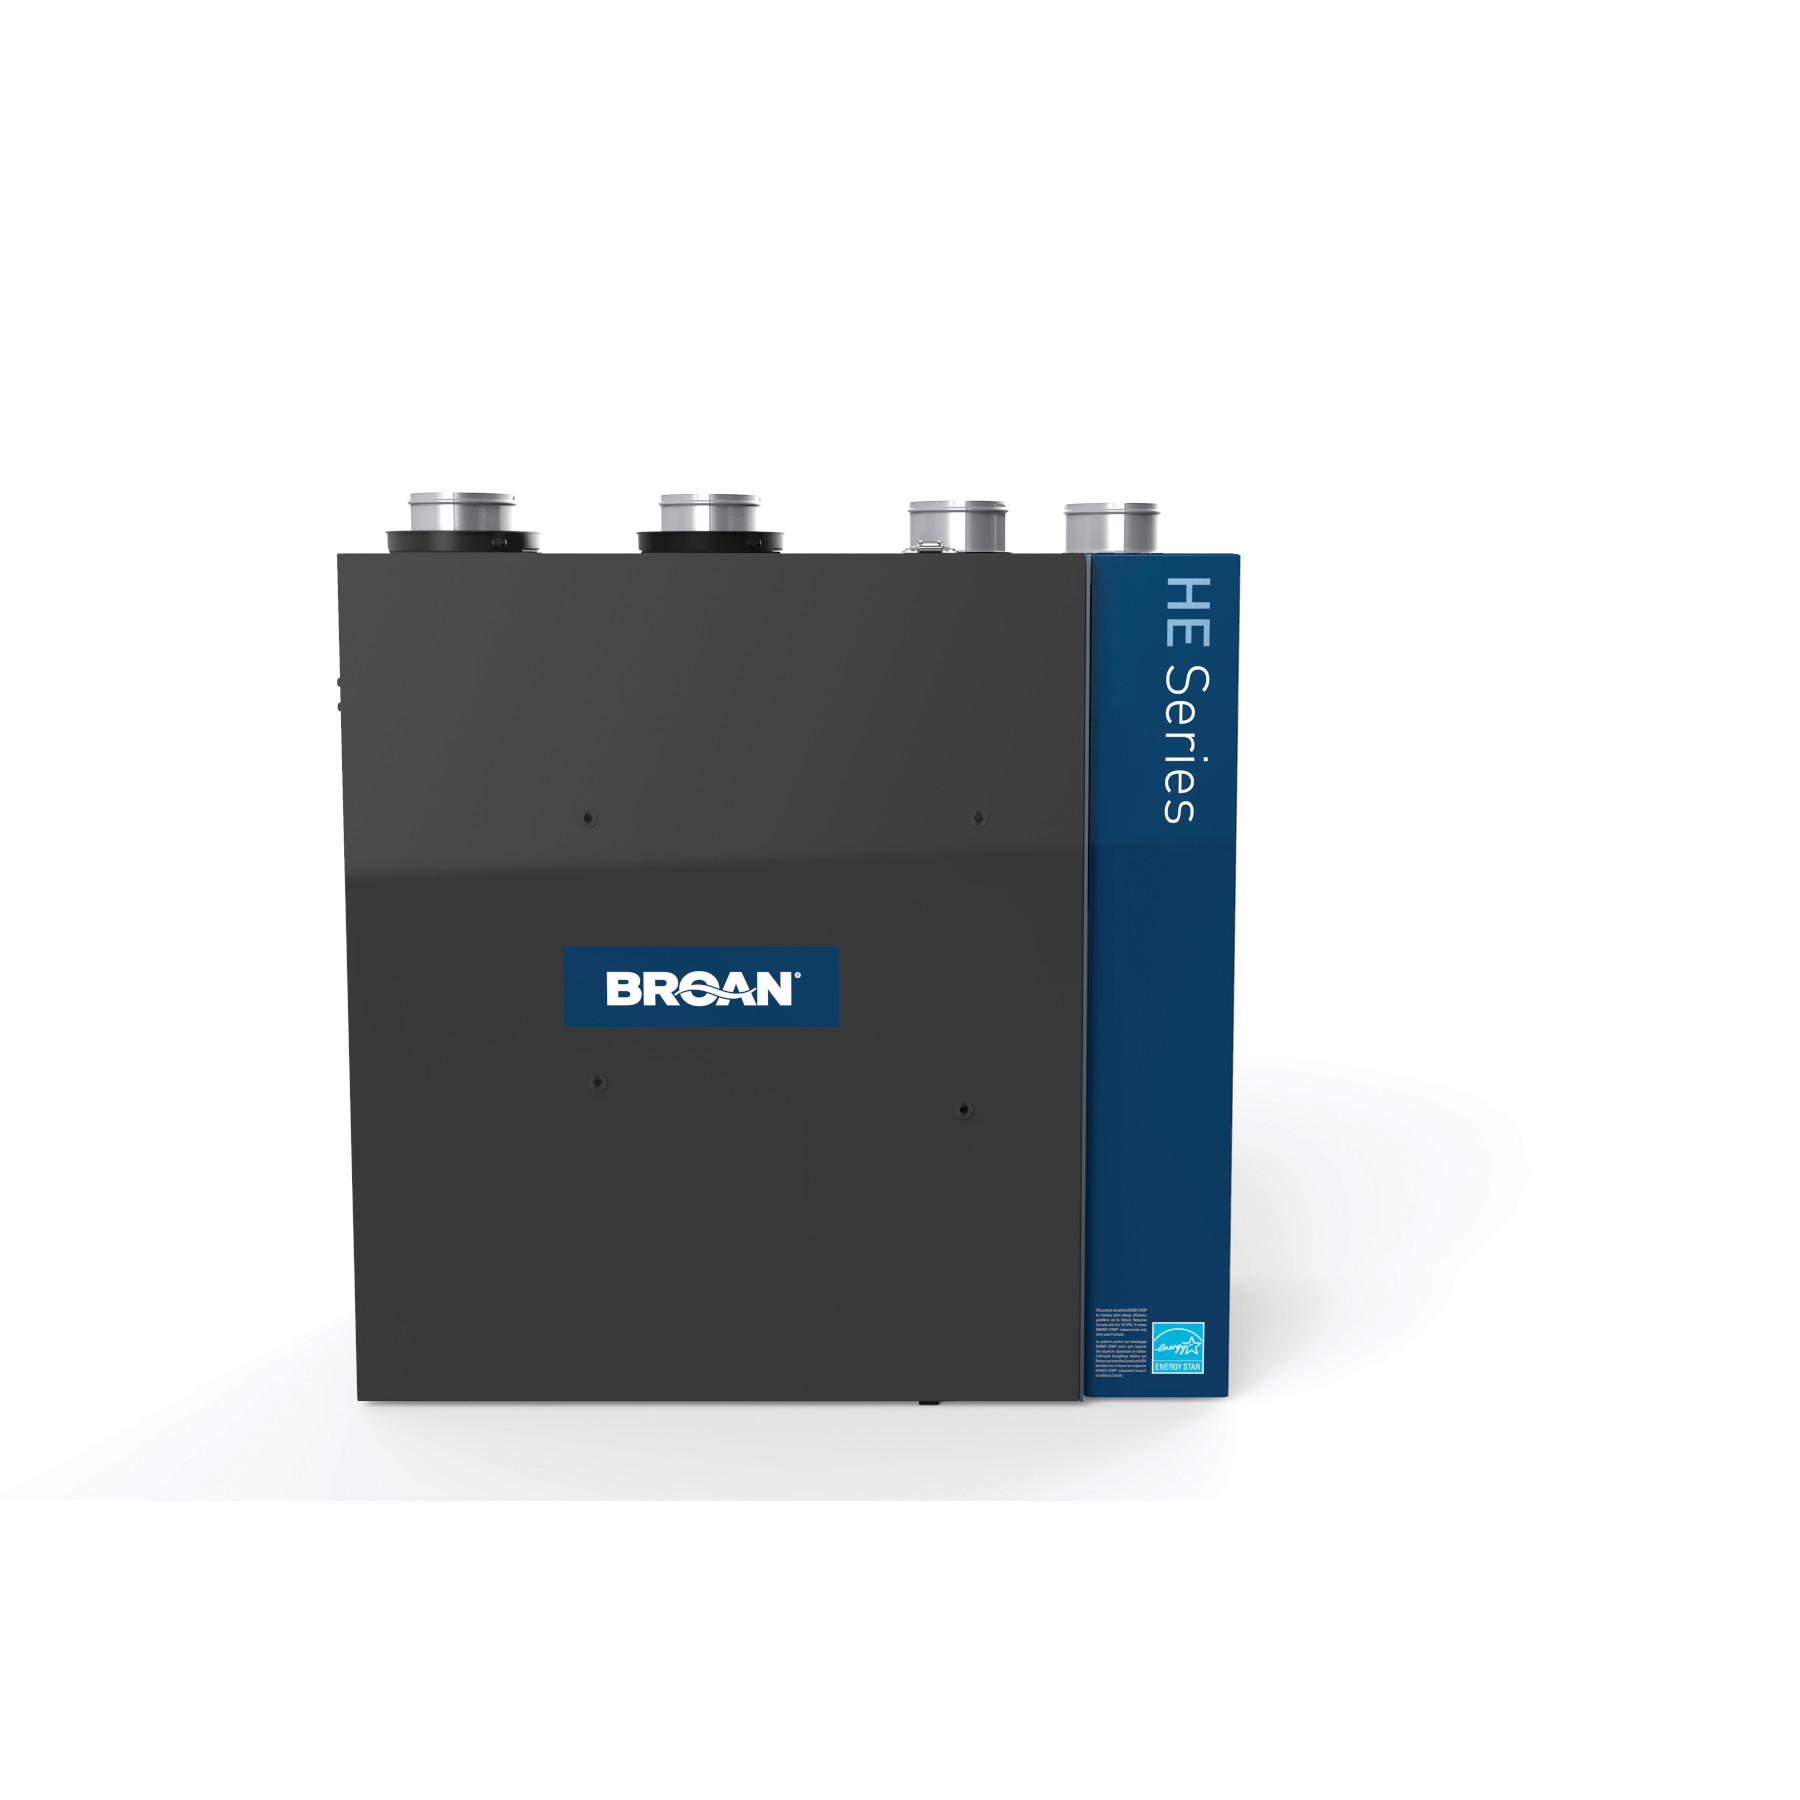 Broan® HE Series Energy Recovery Ventilator, 210 CFM at 0.4 in. w.g.